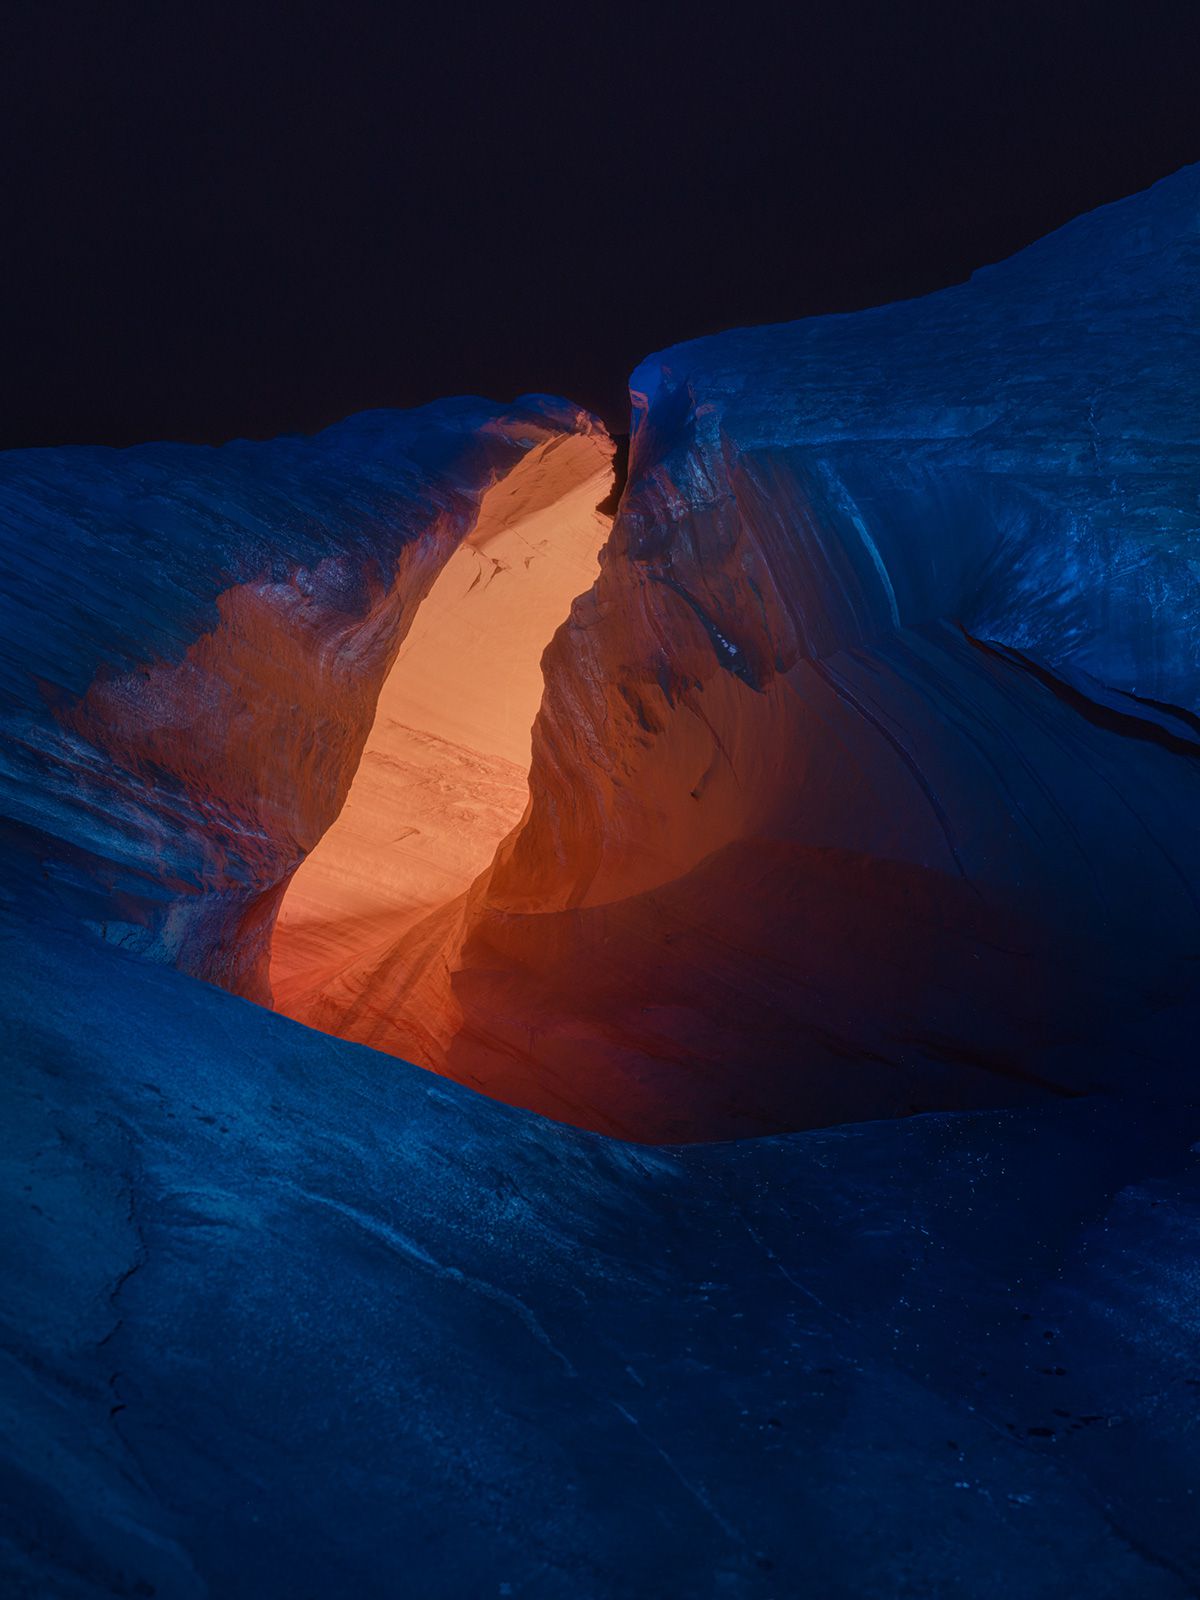 Spectral An Awe Inspiring Landscape Photography Series By Cody Cobb (2)